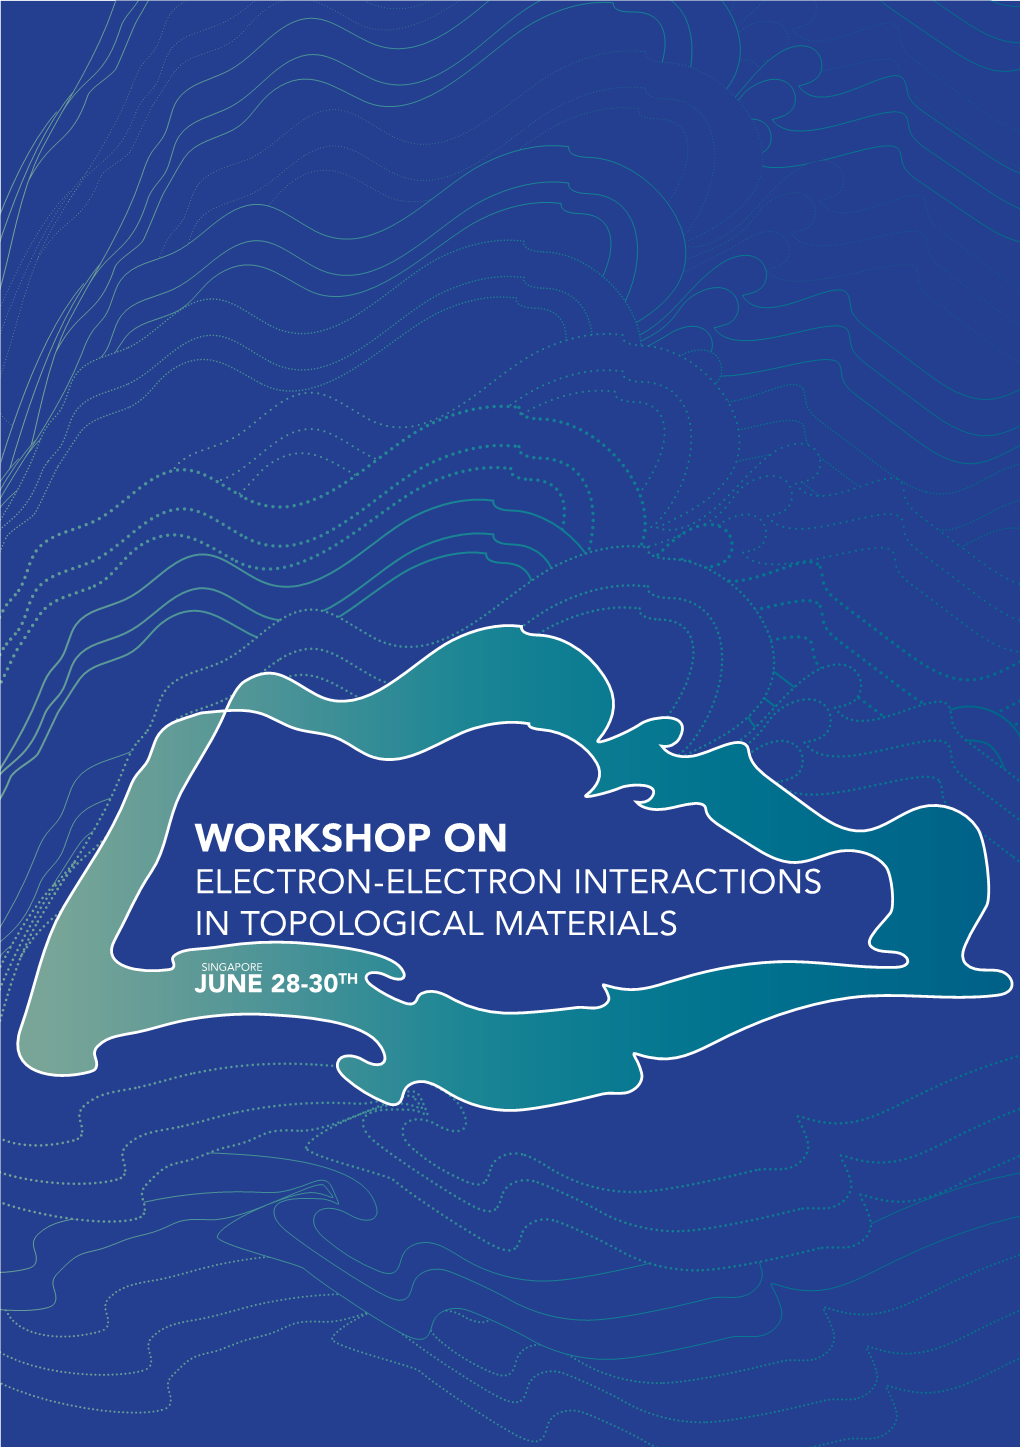 Workshop on Electron-Electron Interactions in Topological Materials